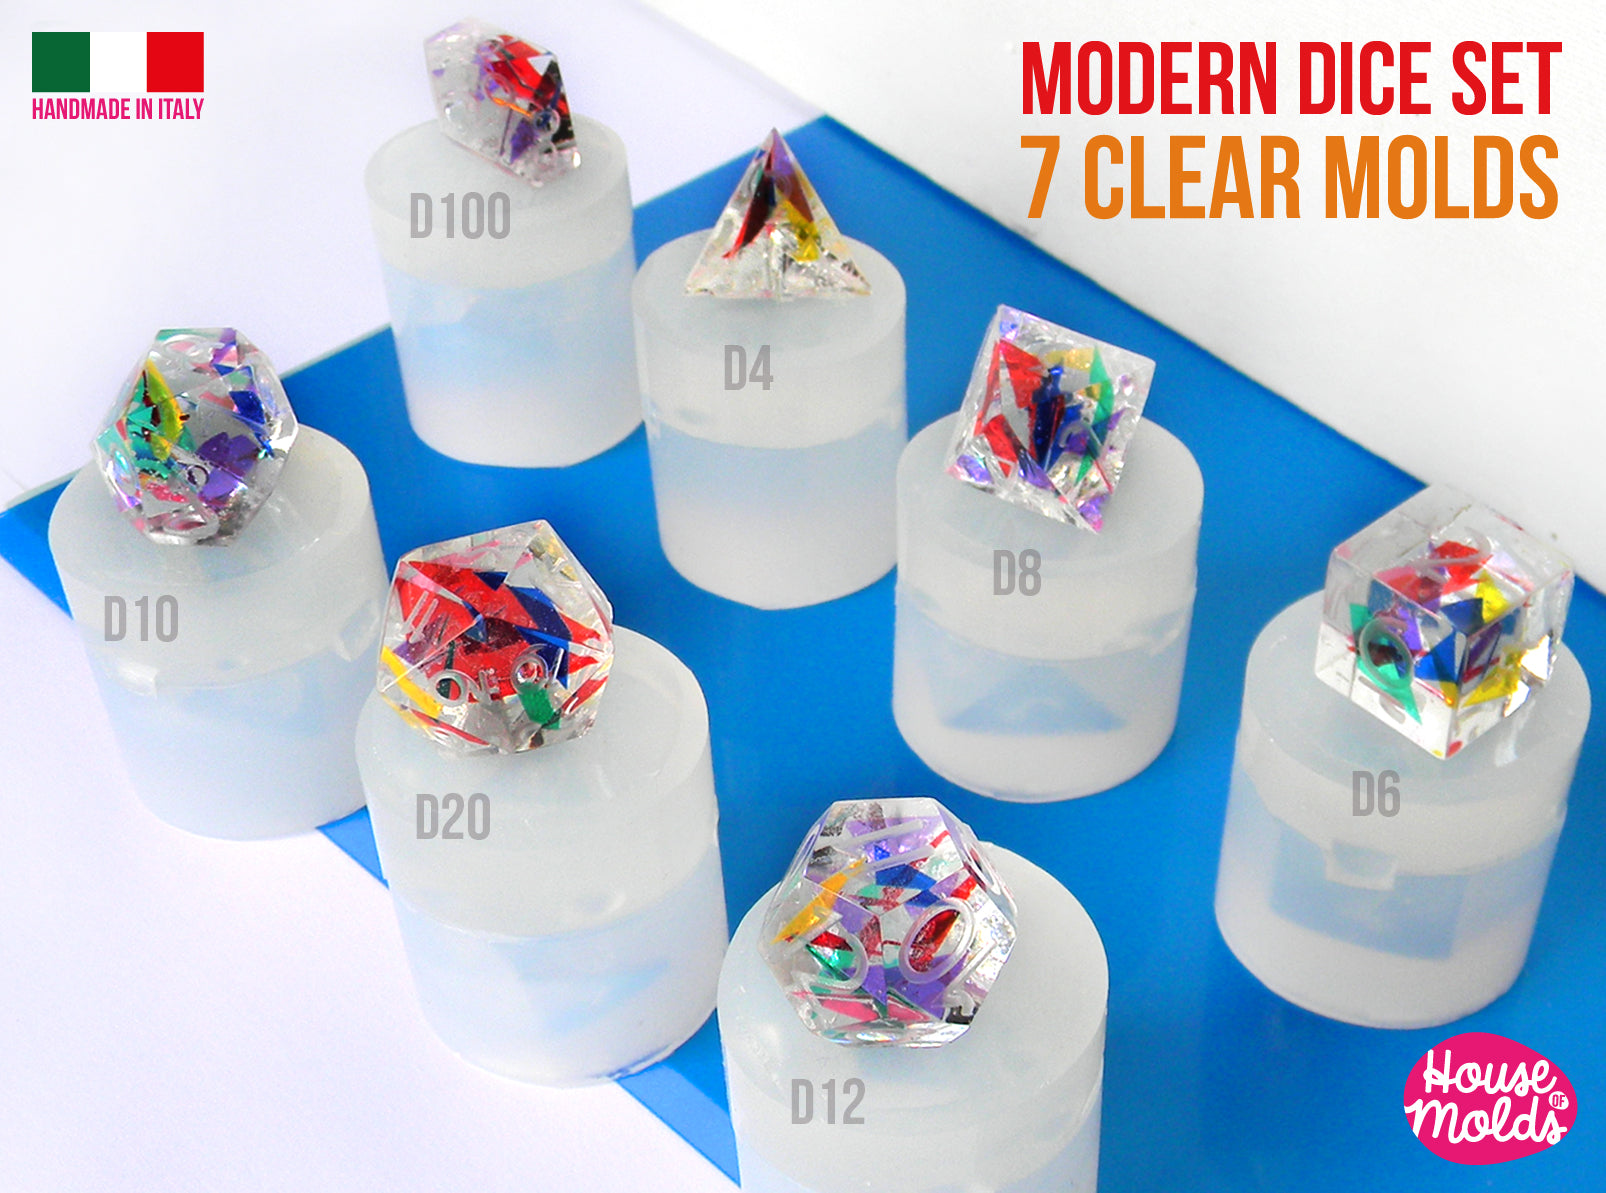 Gamer Polyhedral Dice Silicone Mold (Cap Molds)